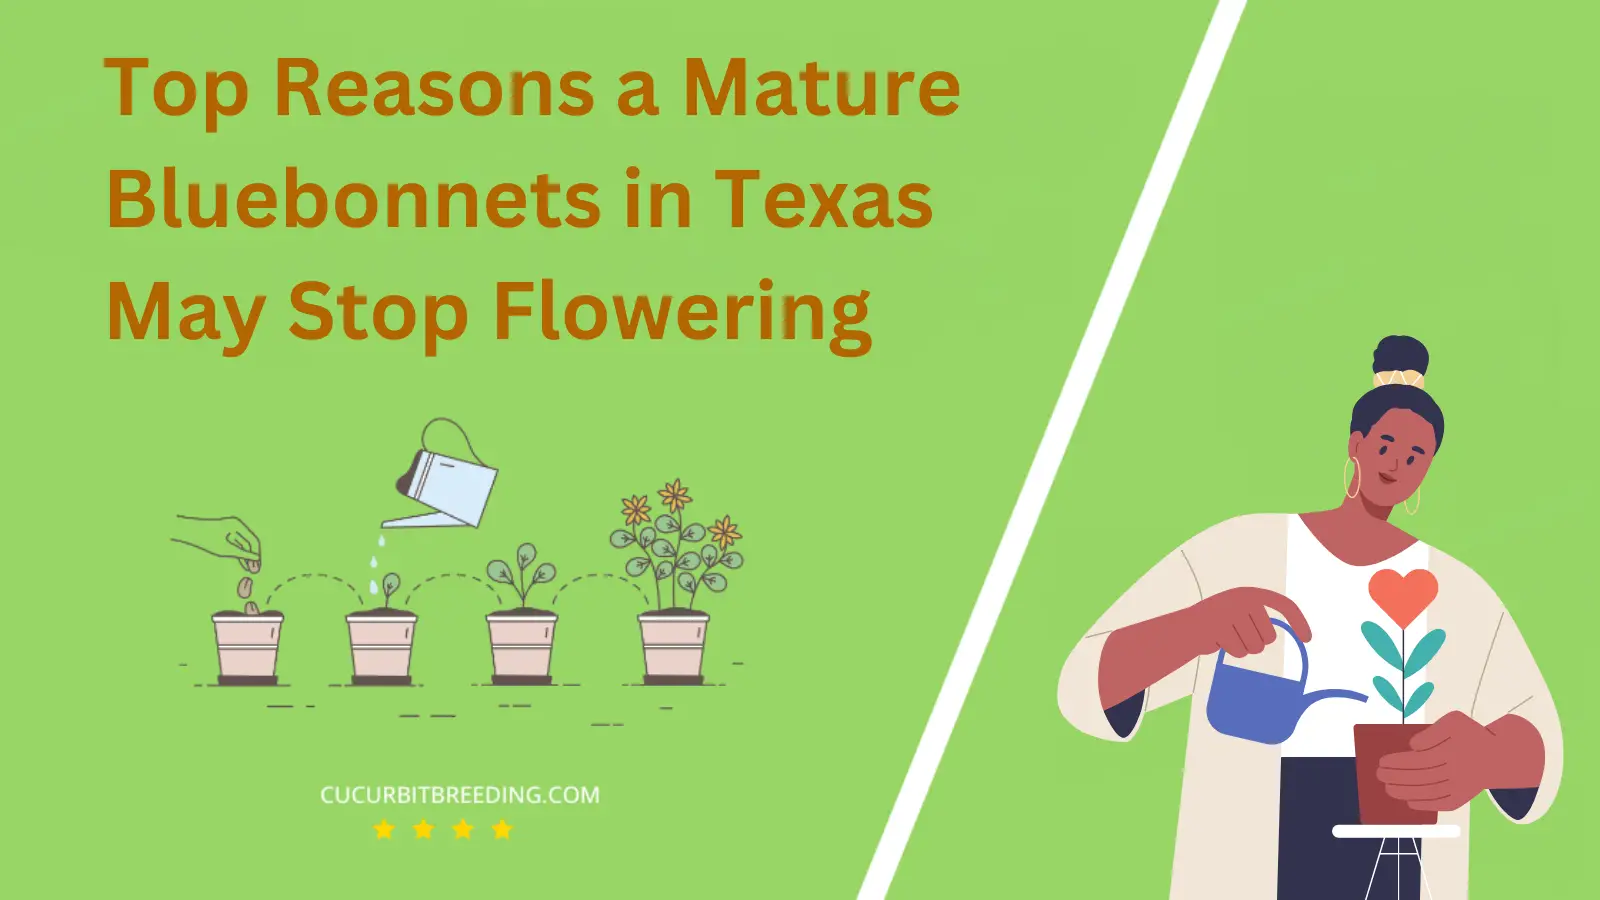 Top Reasons a Mature Bluebonnets in Texas May Stop Flowering